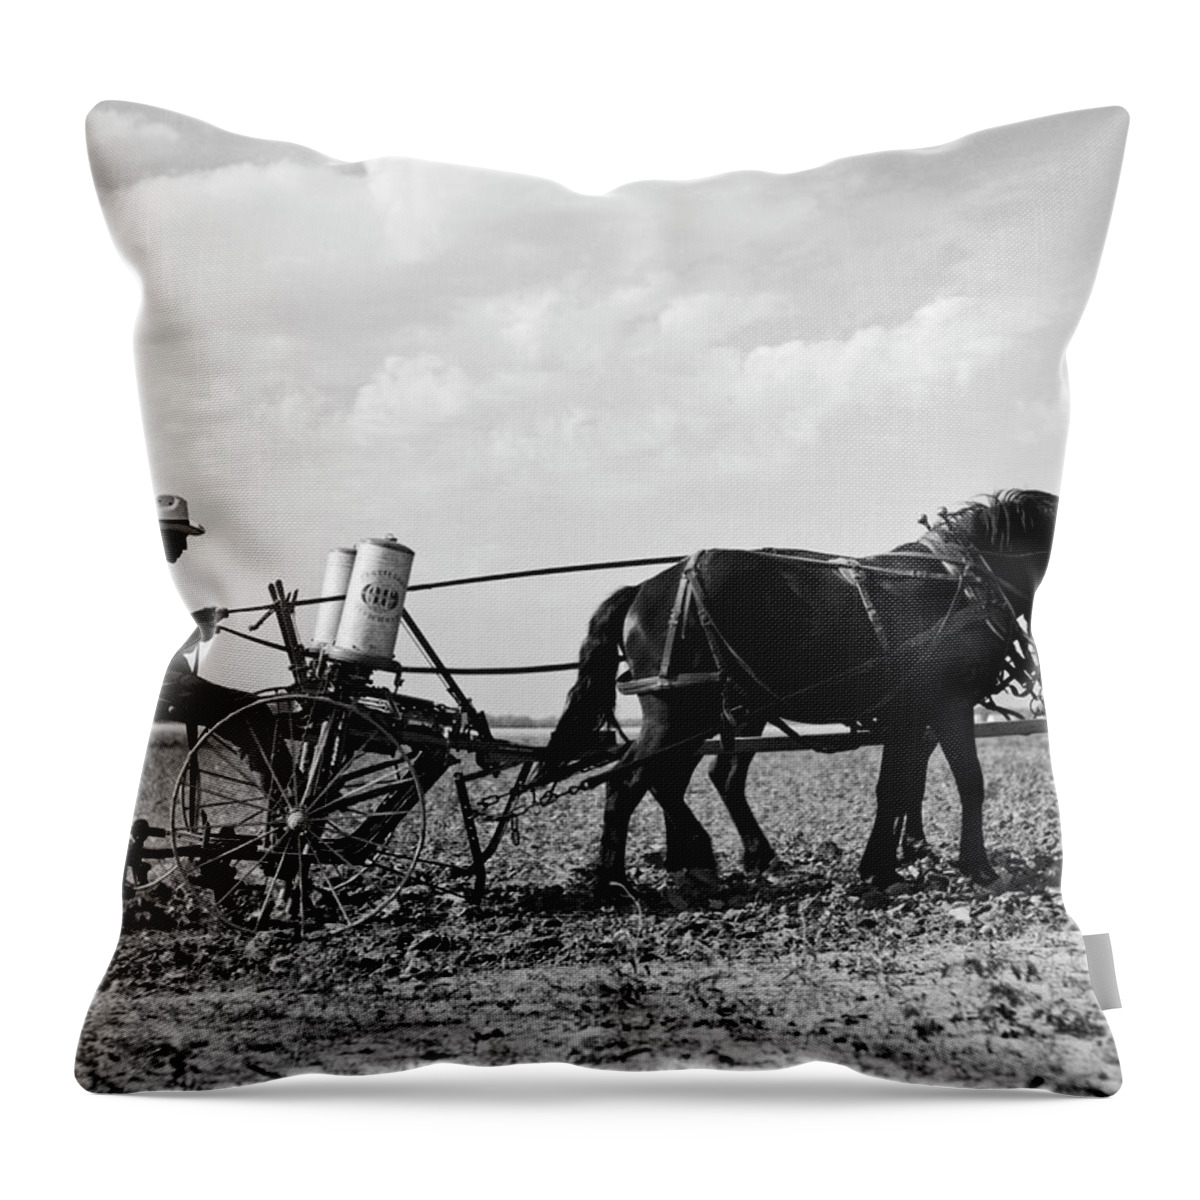 1 Person Throw Pillow featuring the photograph Farmer Fertilizing Corn by Underwood Archives  Arthur Rothstein